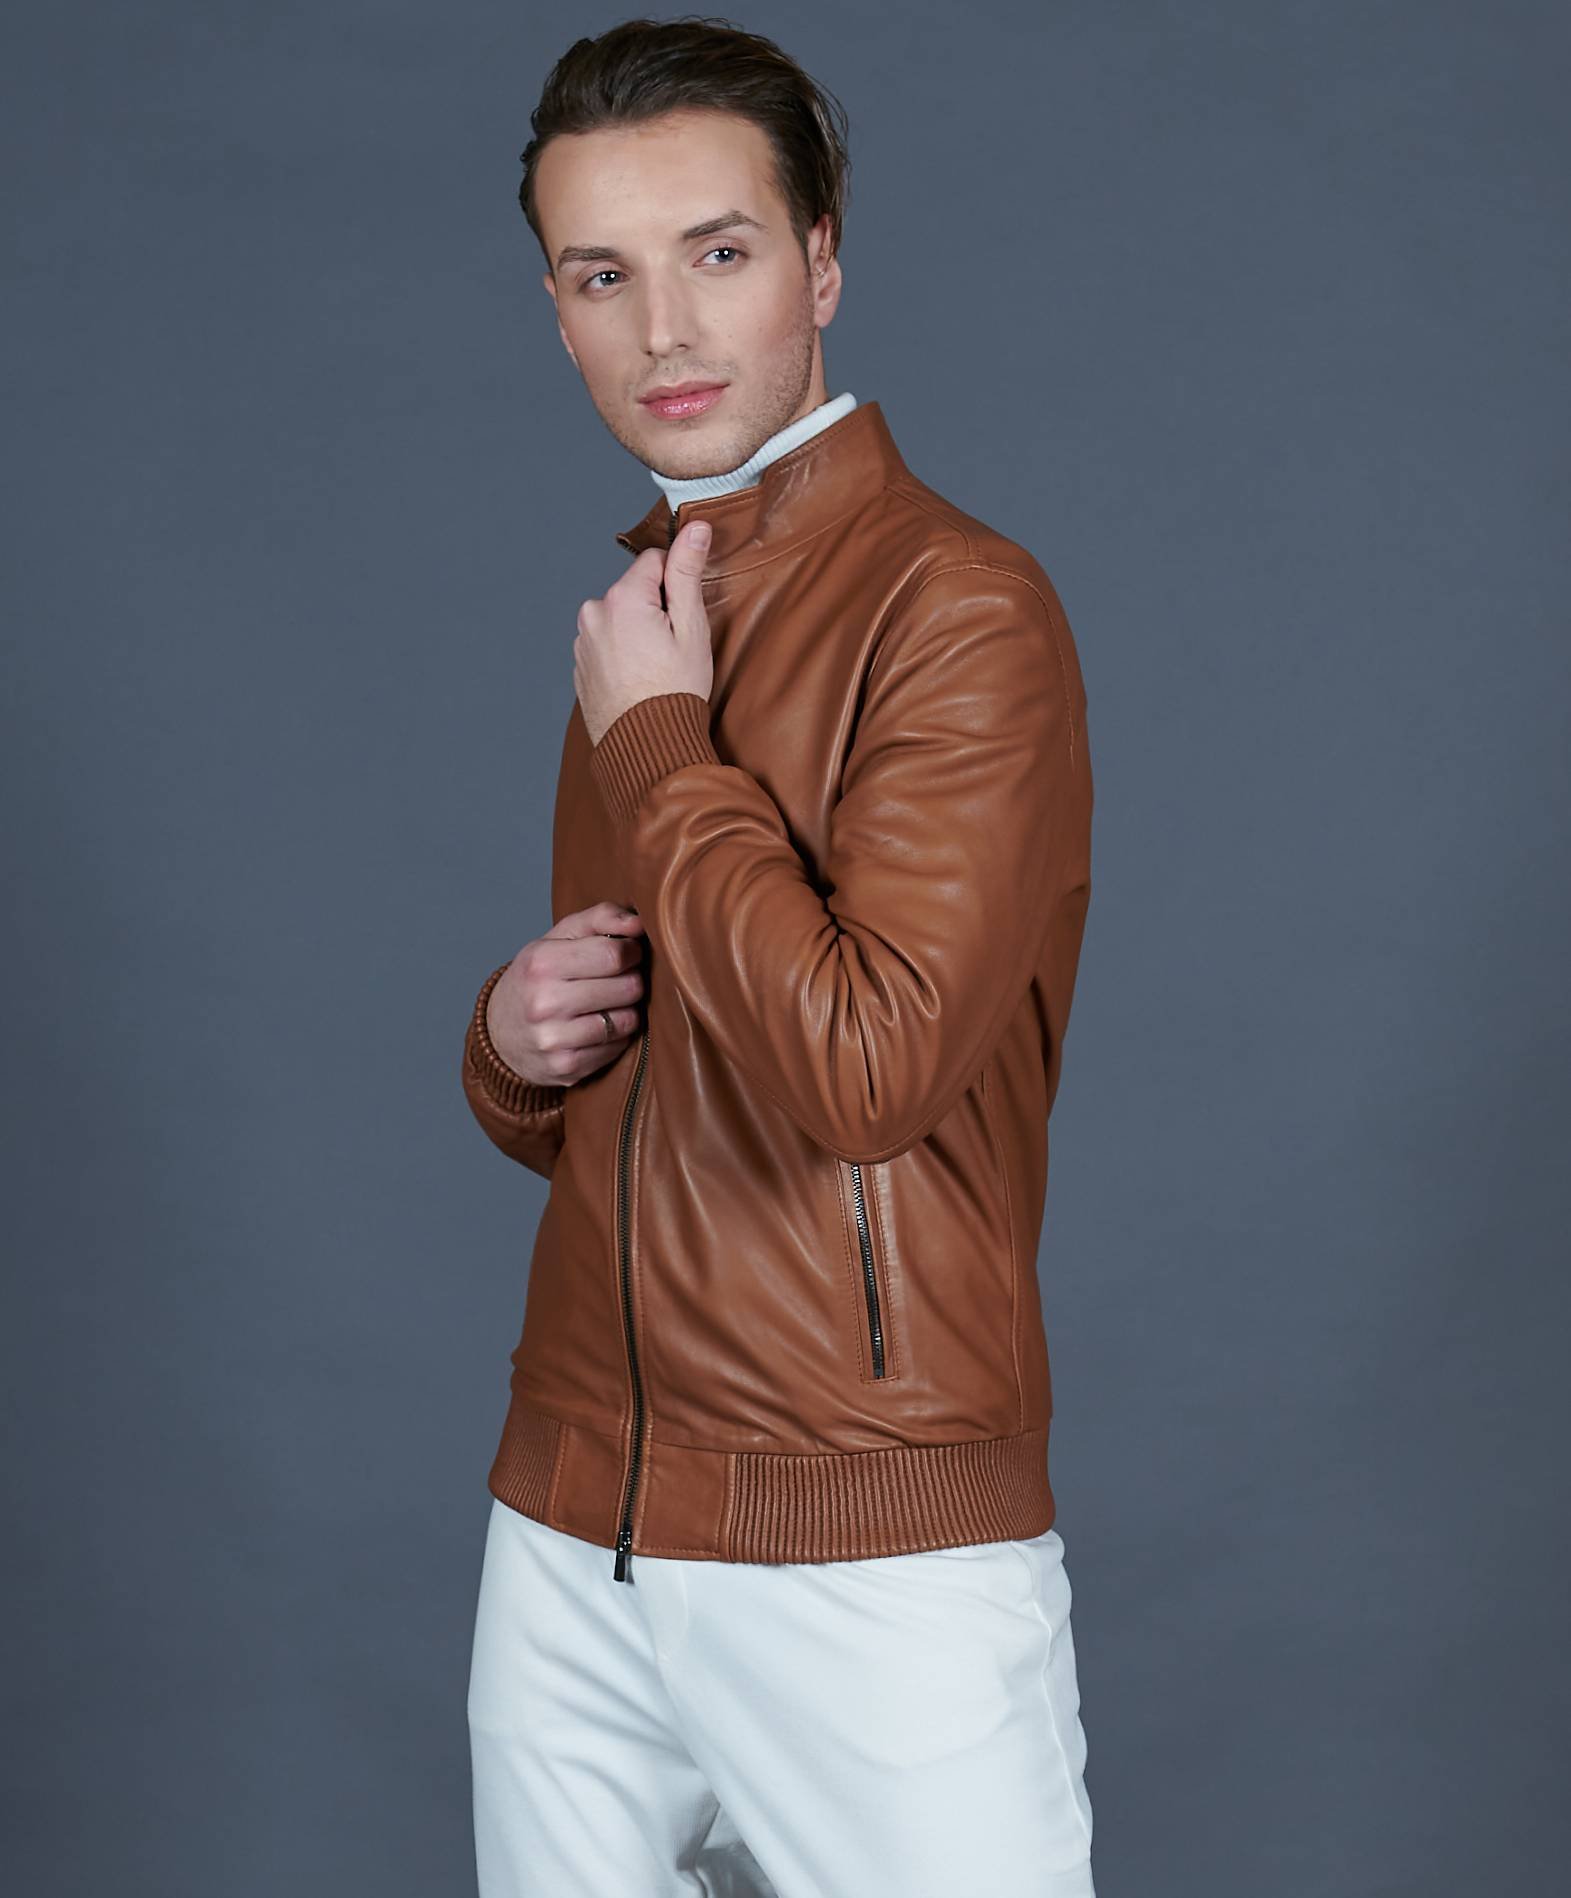 Mens Tan Brown Bomber Leather Jacket